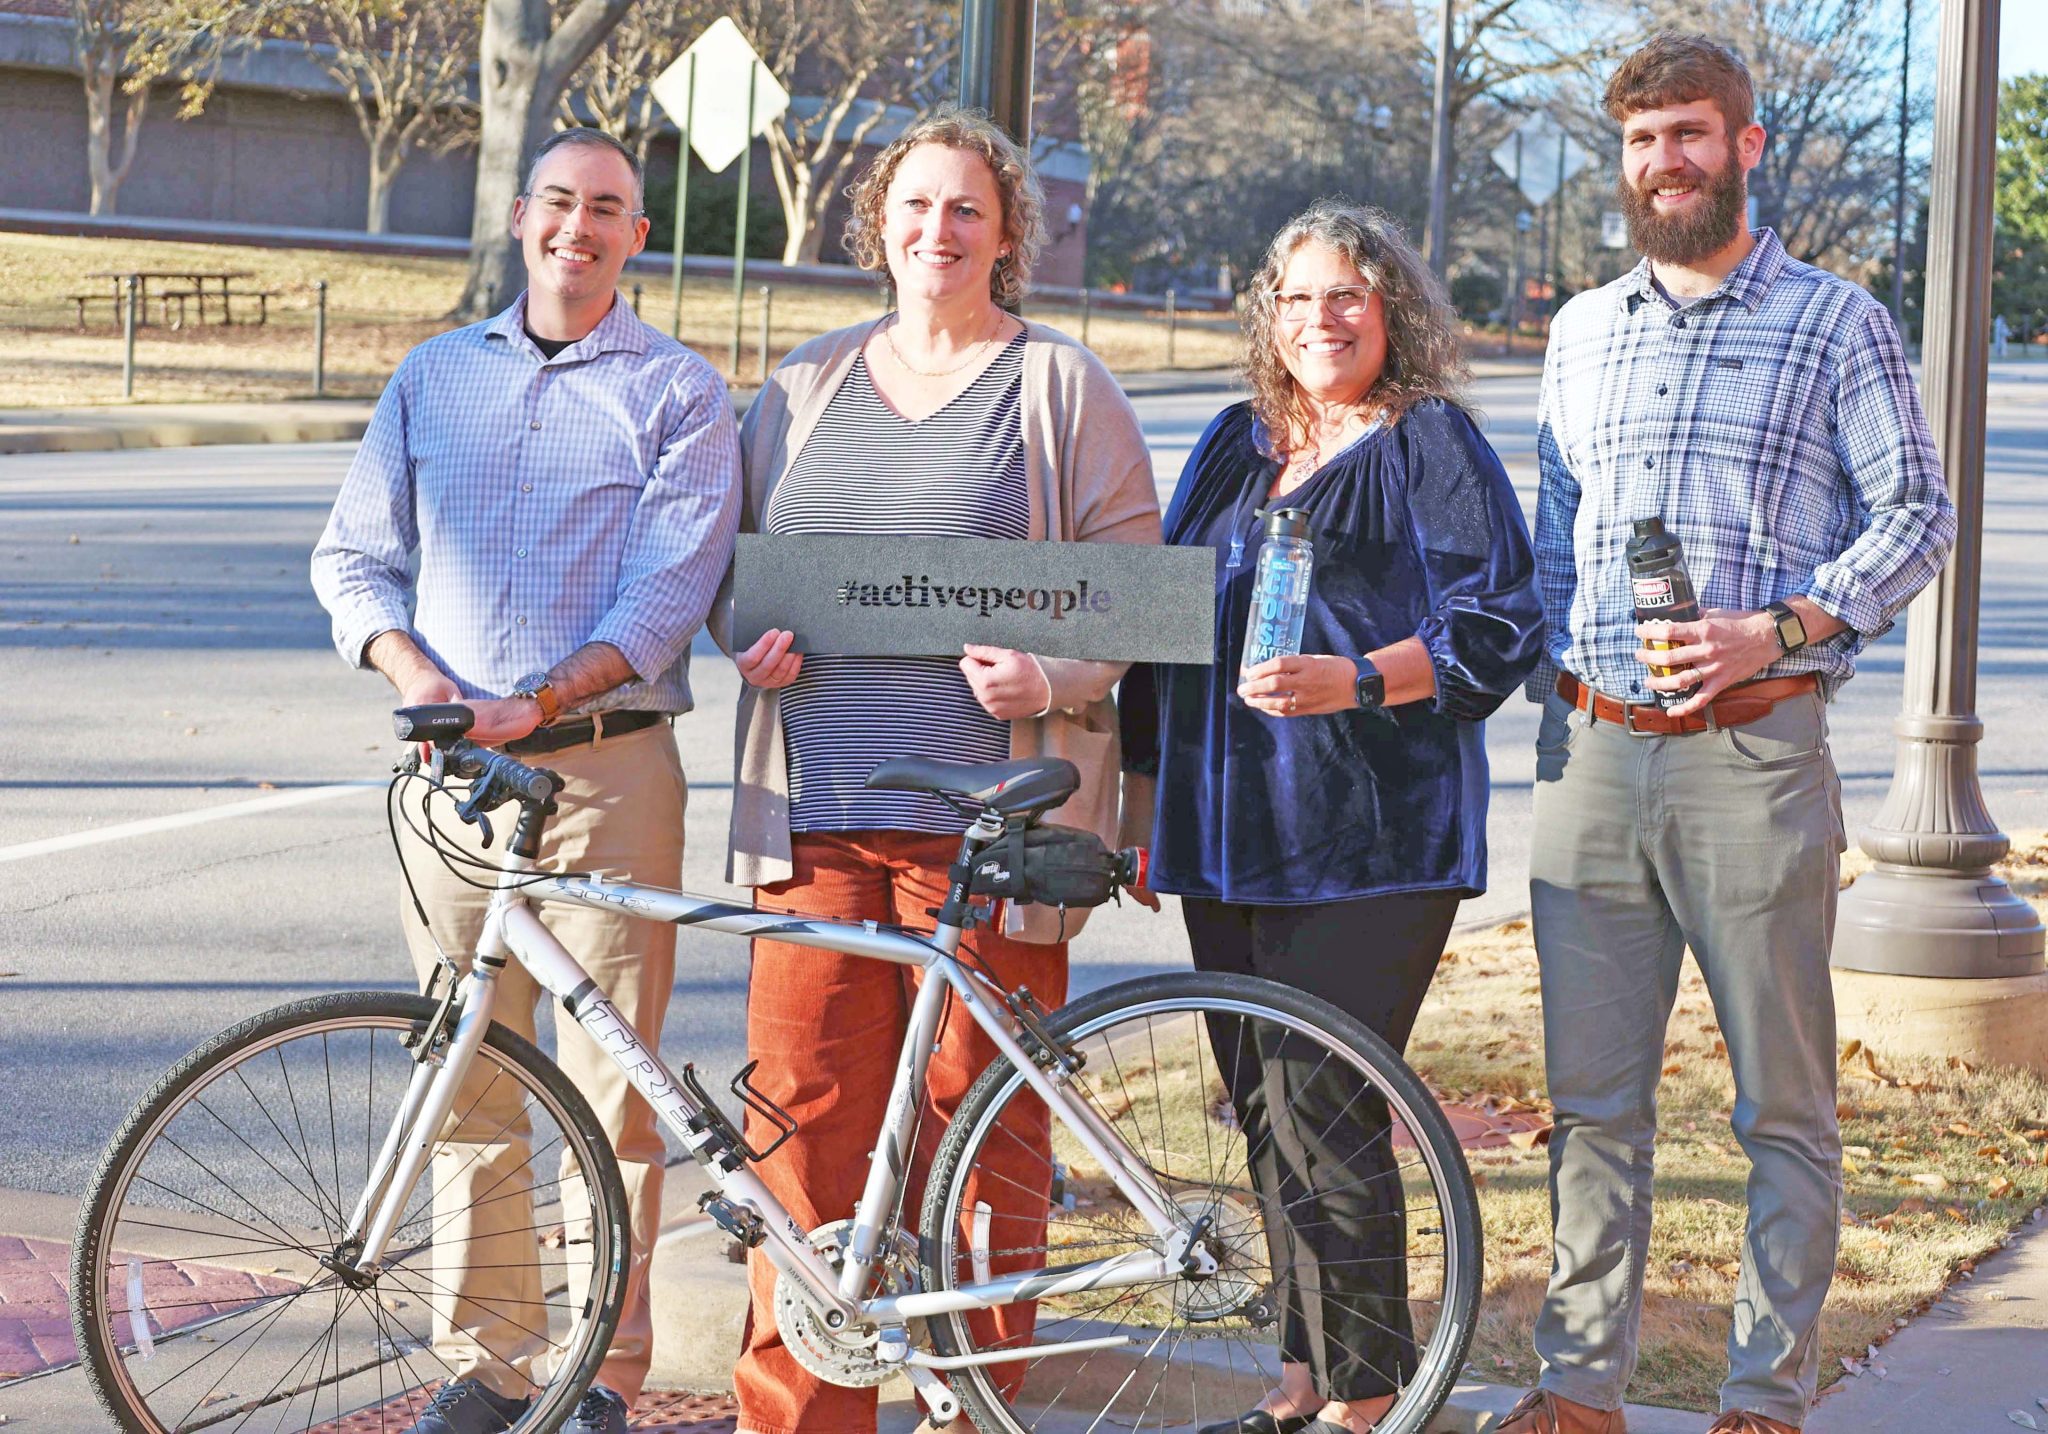 ALProHealth team members Jeffrey LaMondia, Ruth Brock, Sondra Parmer, and Mitch Carter stand on sidewalk holding sign and bicycle.